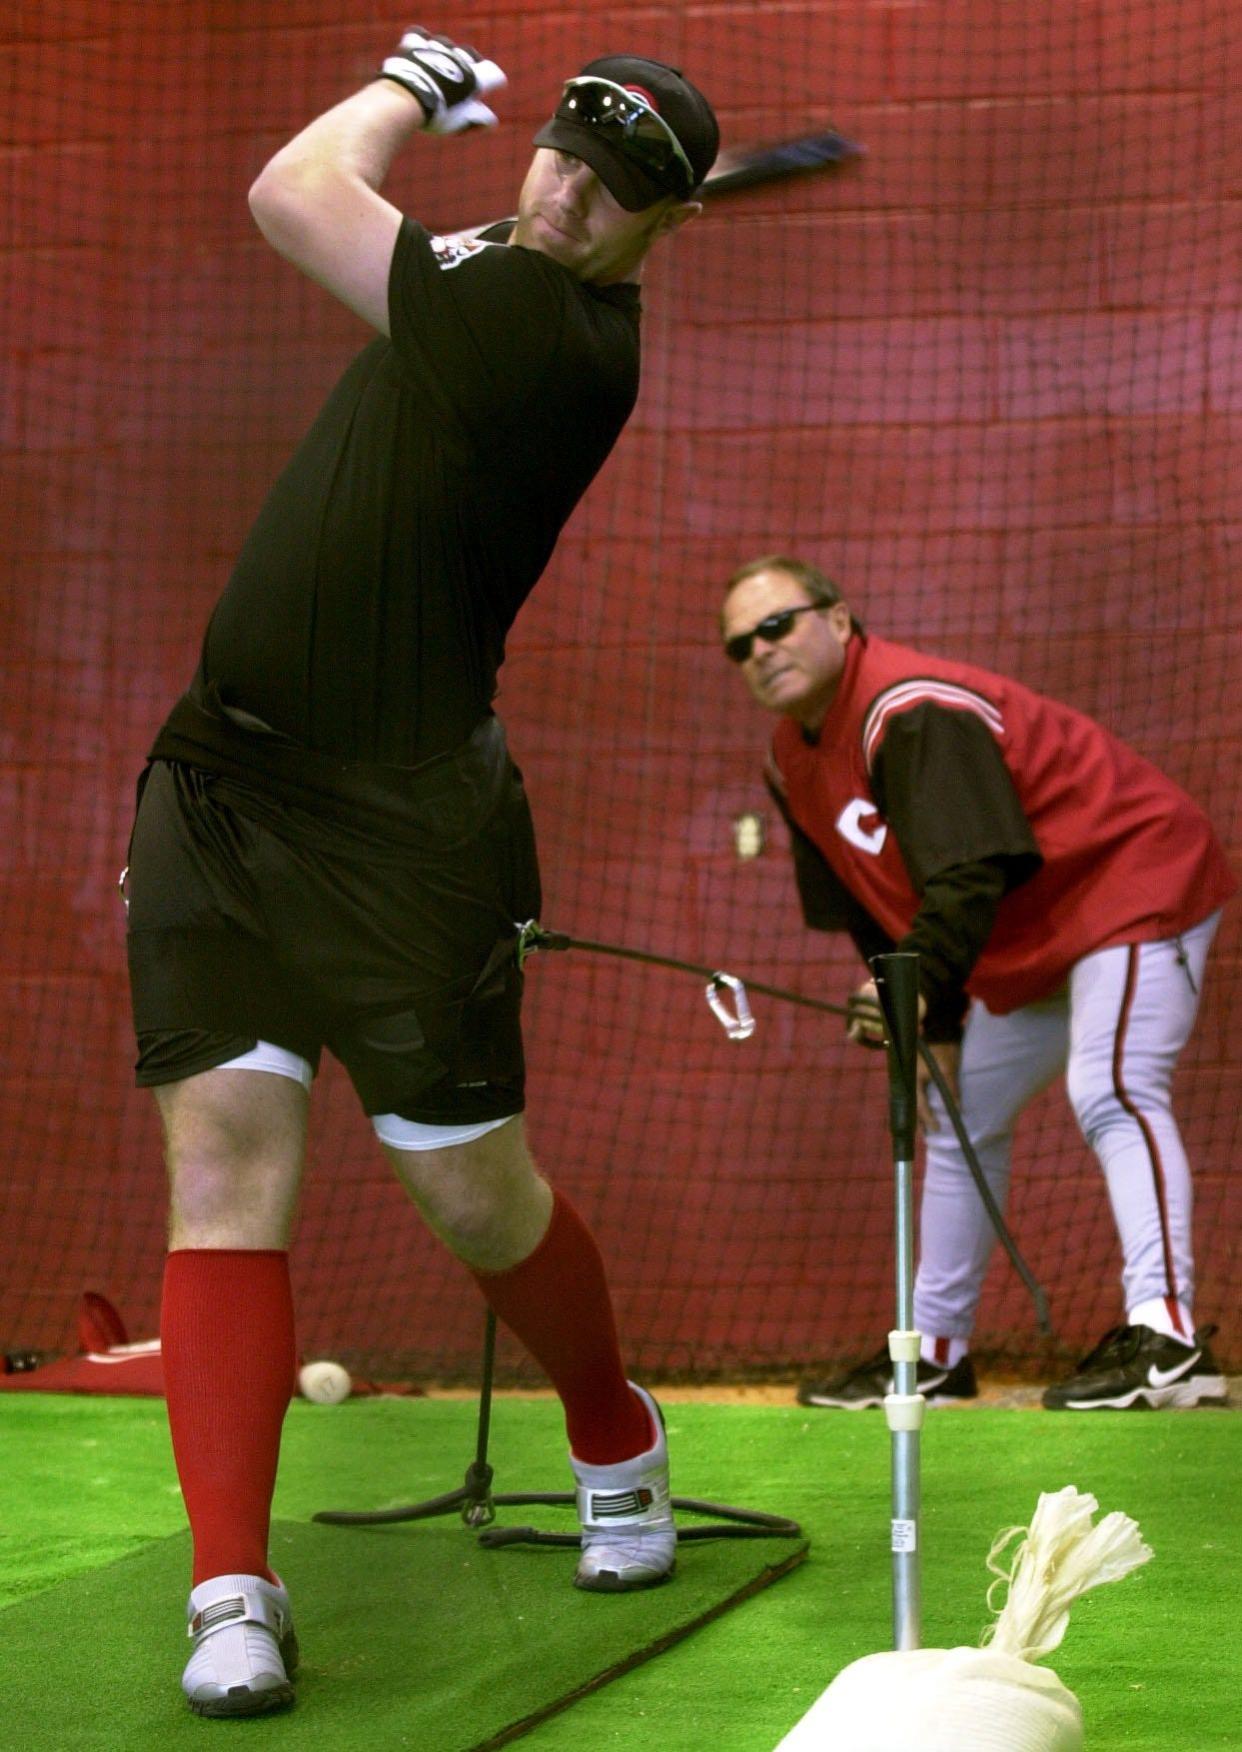 FEBRUARY 19, 2002: Adam Dunn takes batting practice while hitting coach Jim Lefebvre watches his swing during spring training at the City of Sarasota Sports Complex.